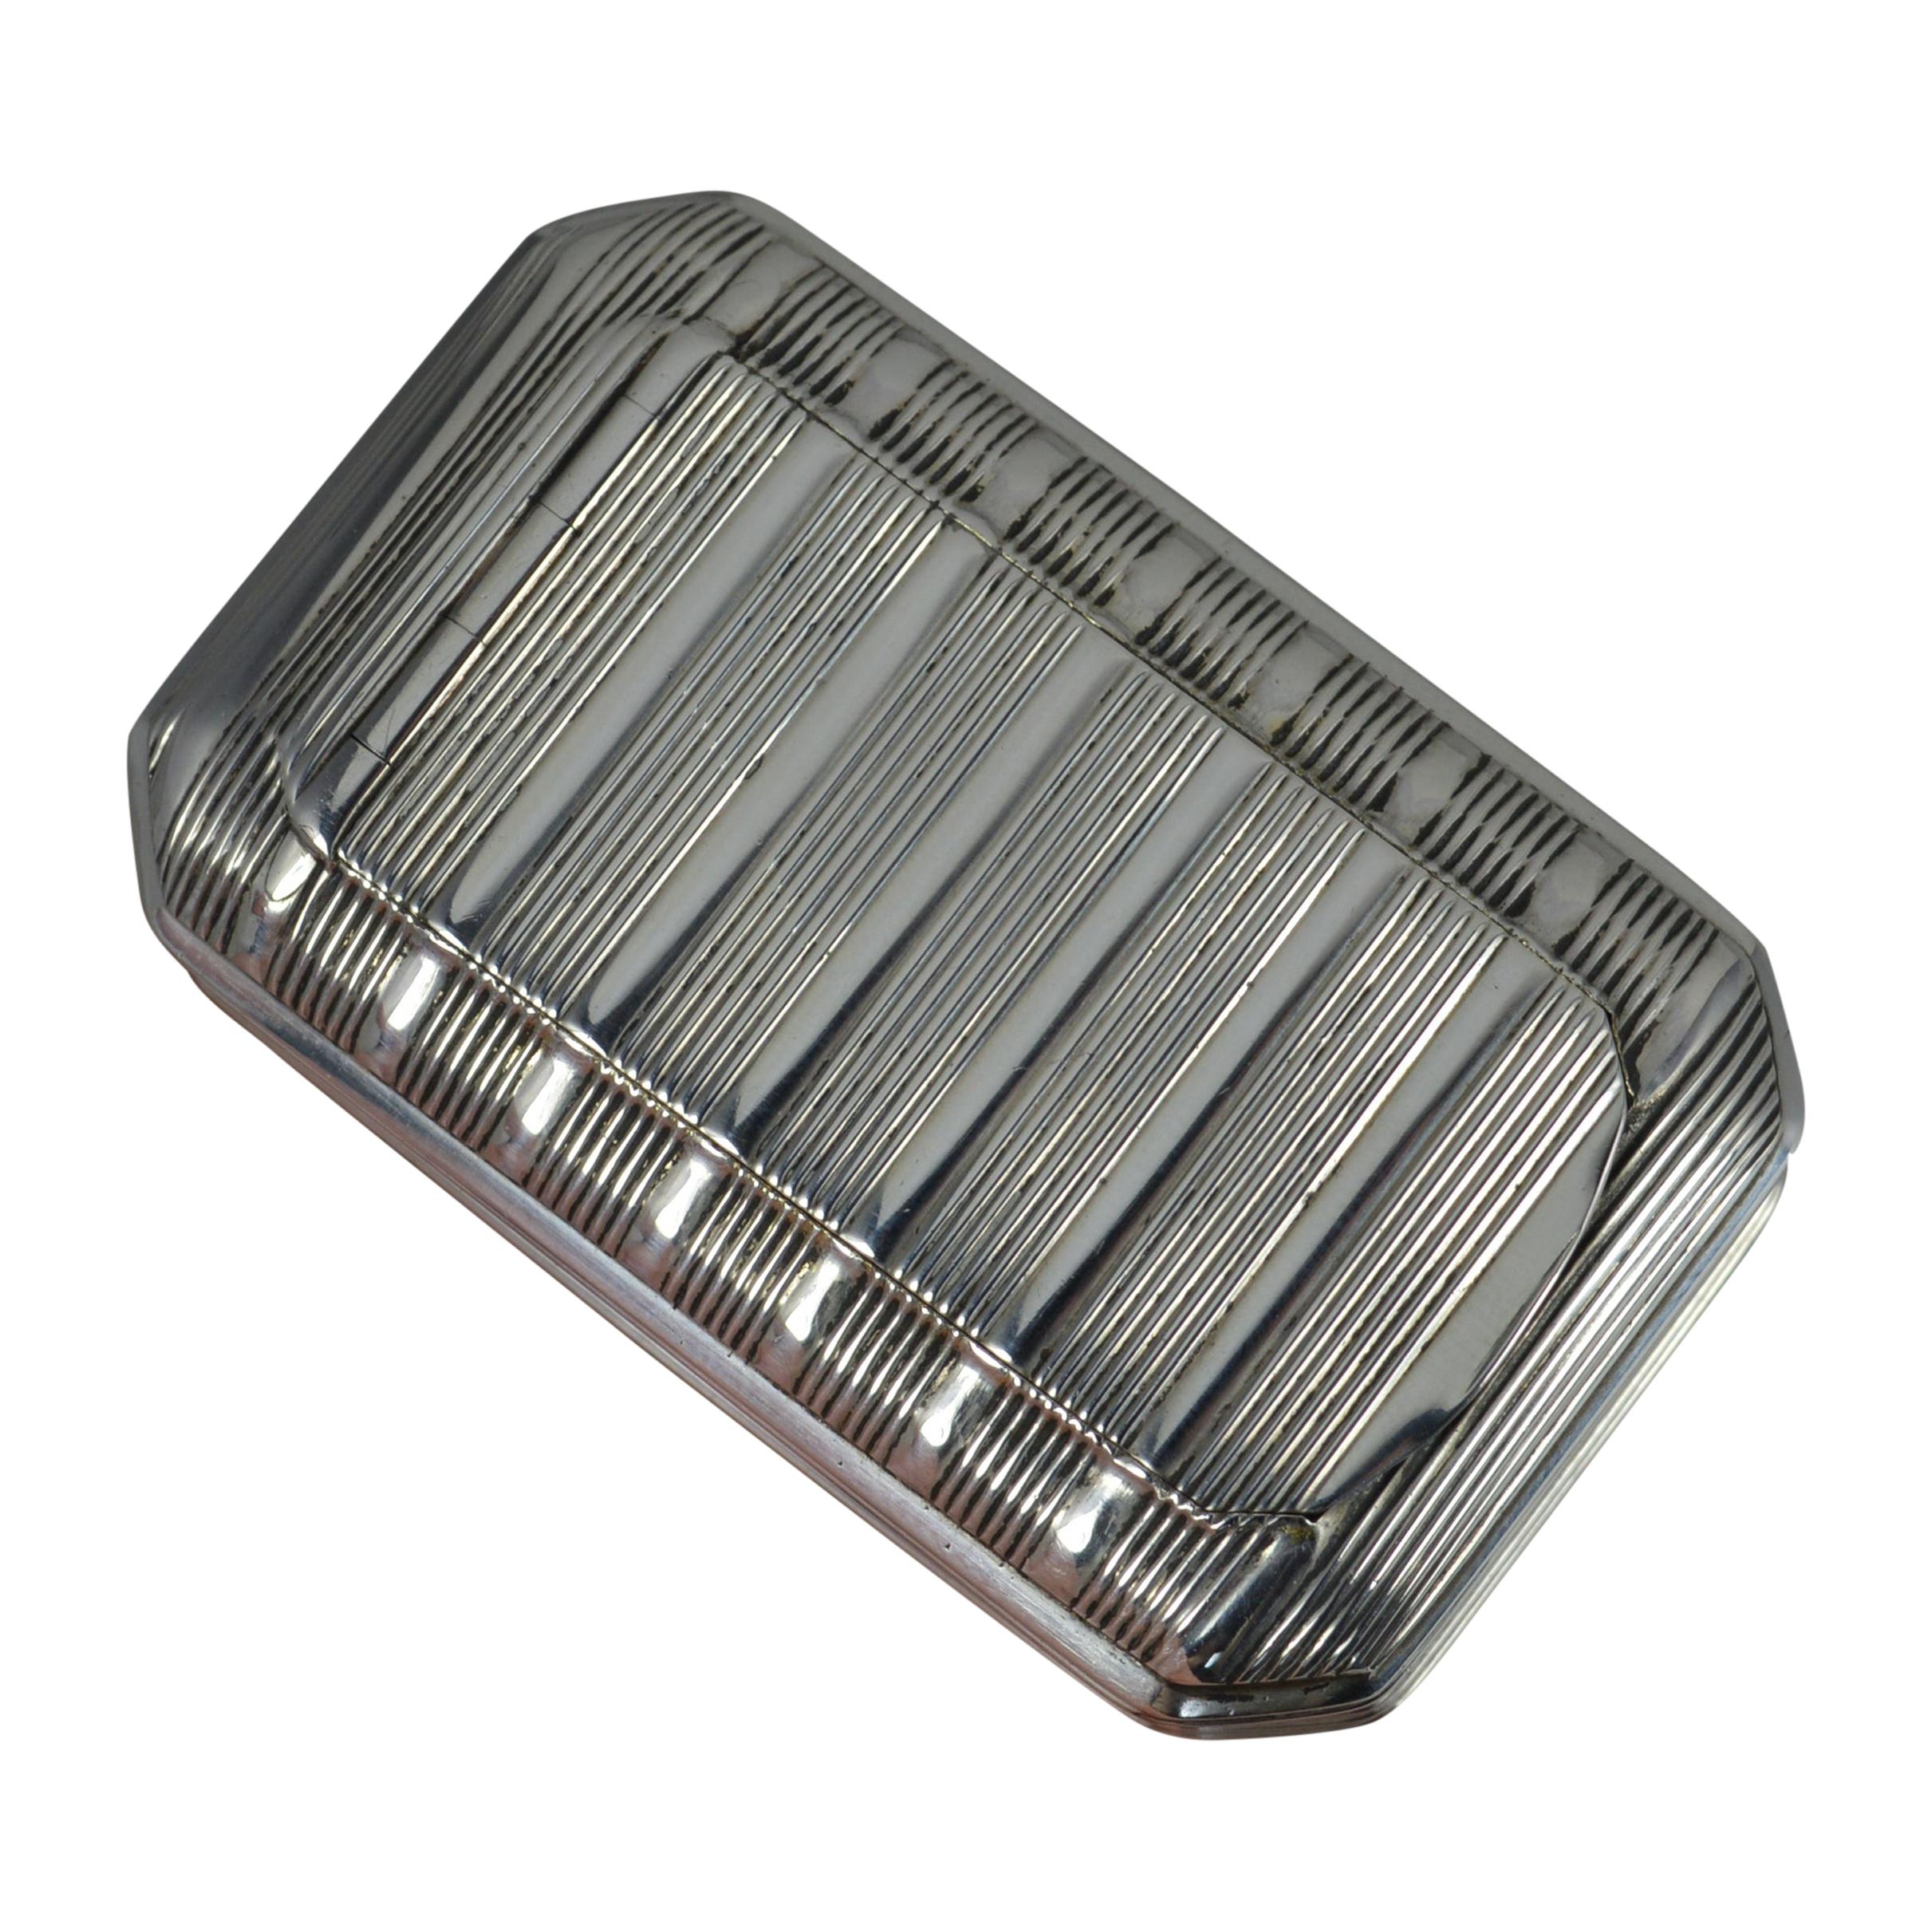 1816 George III Hallmarked Silver Snuff Box with Ribbed Finish